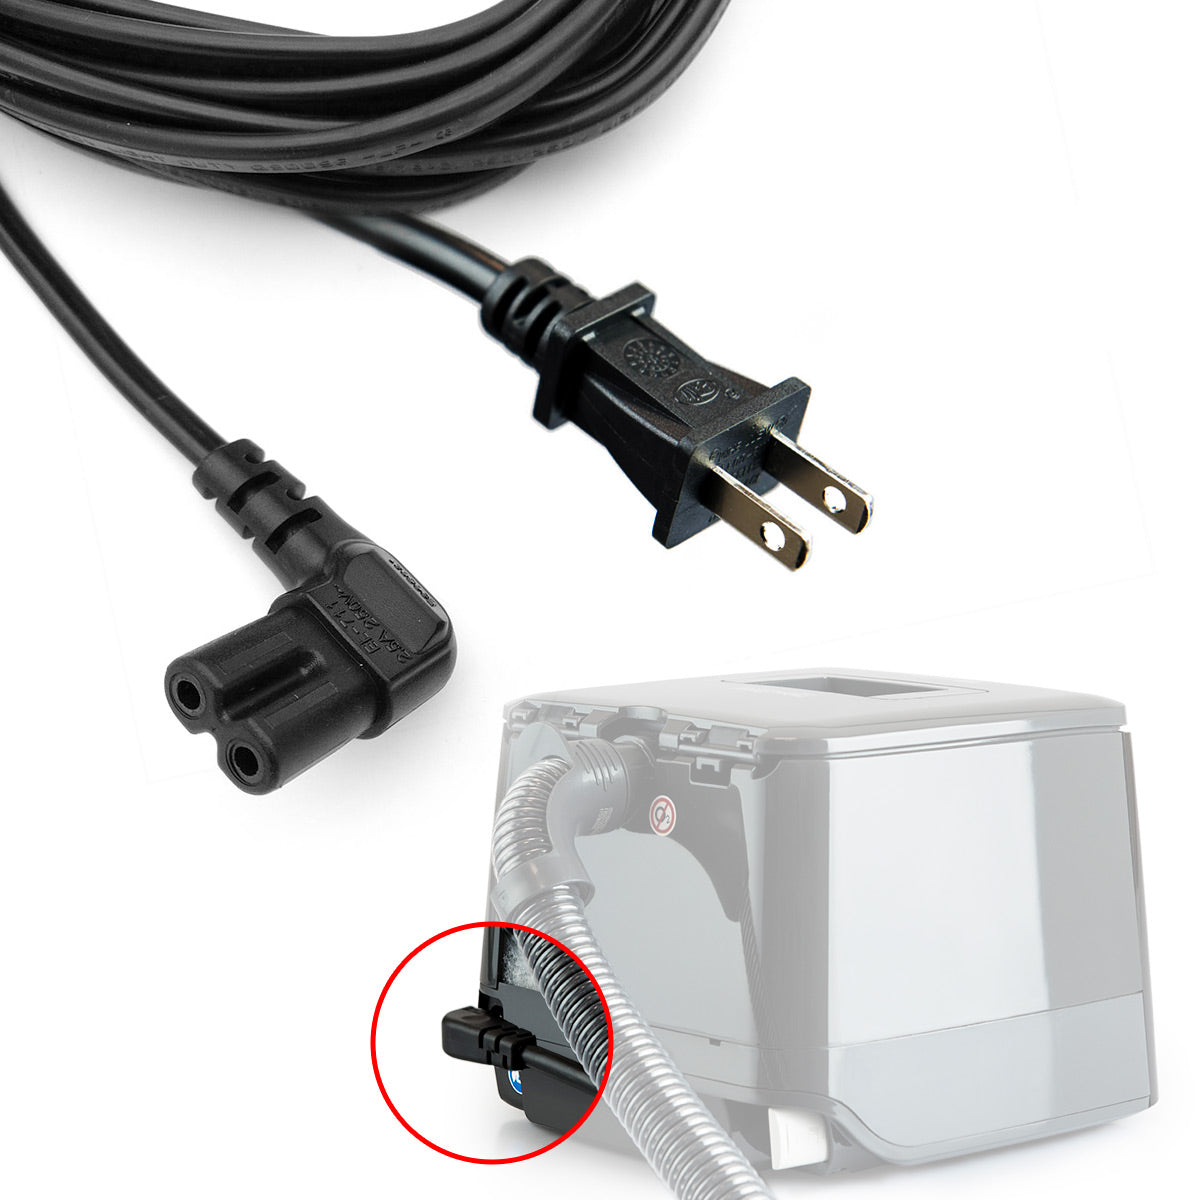 AC Power Cord for F&P SleepStyle Series CPAP Machines